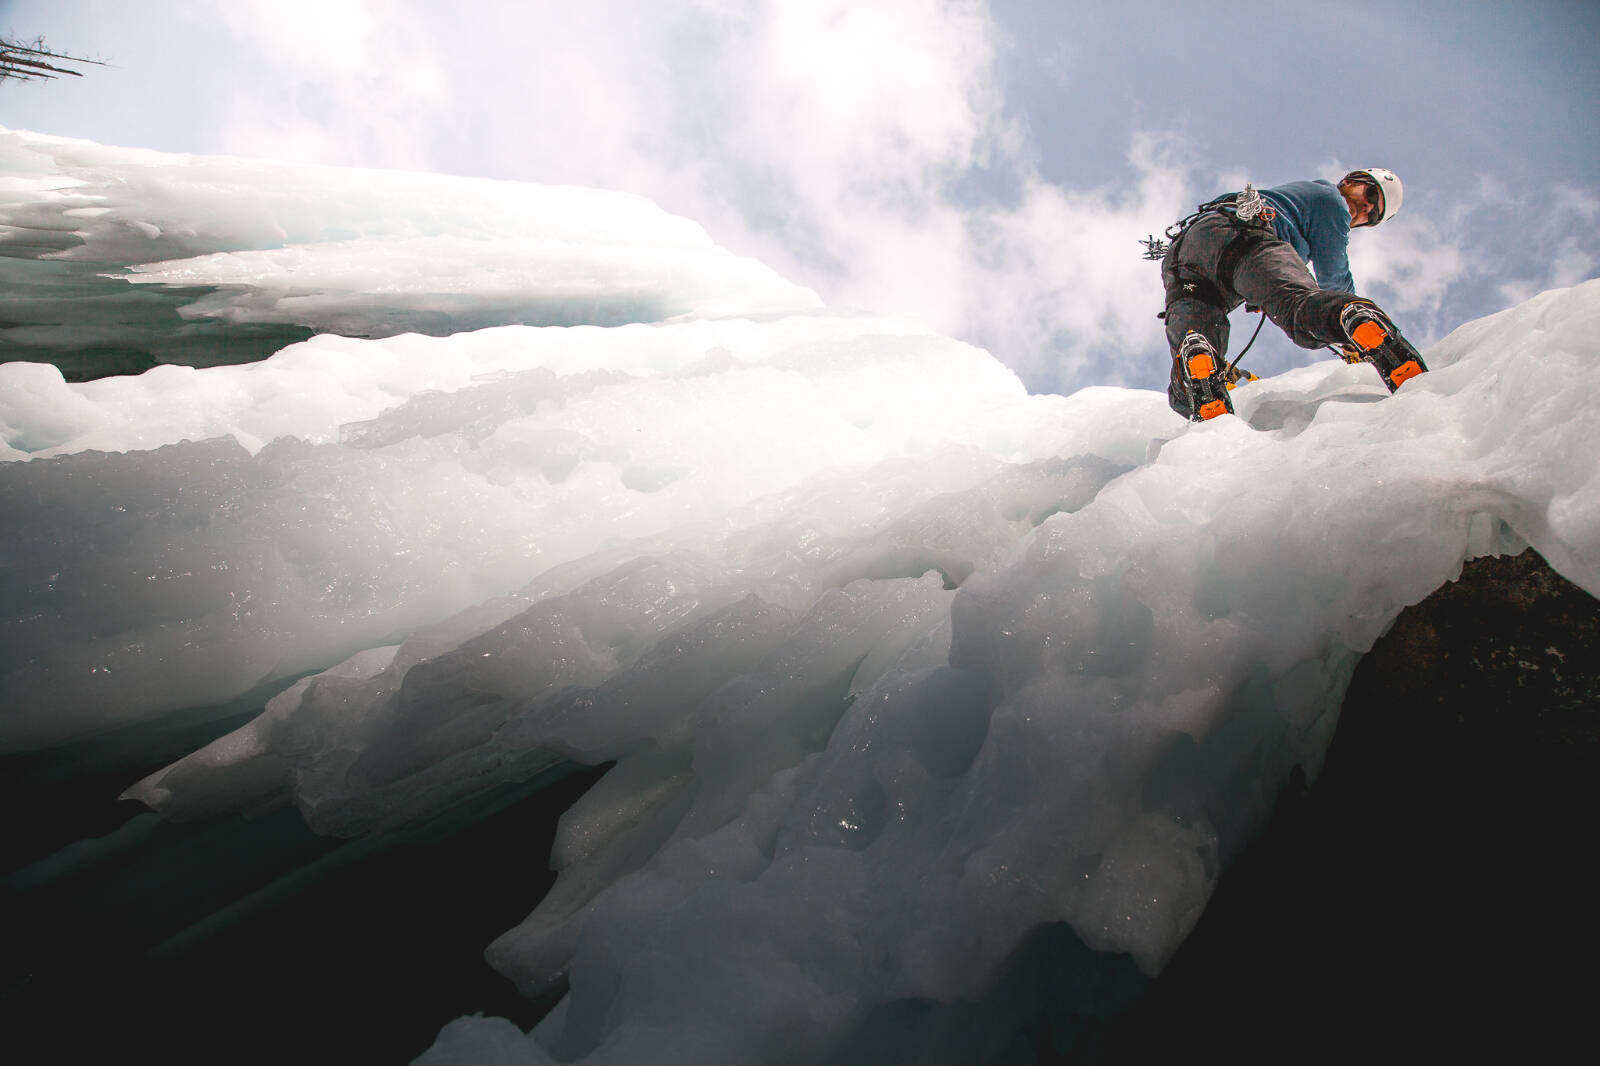 Climbing high in the Cariboo, courtesy of a frozen waterfall in the Williams Lake area. Photo courtesy Explore Cariboo